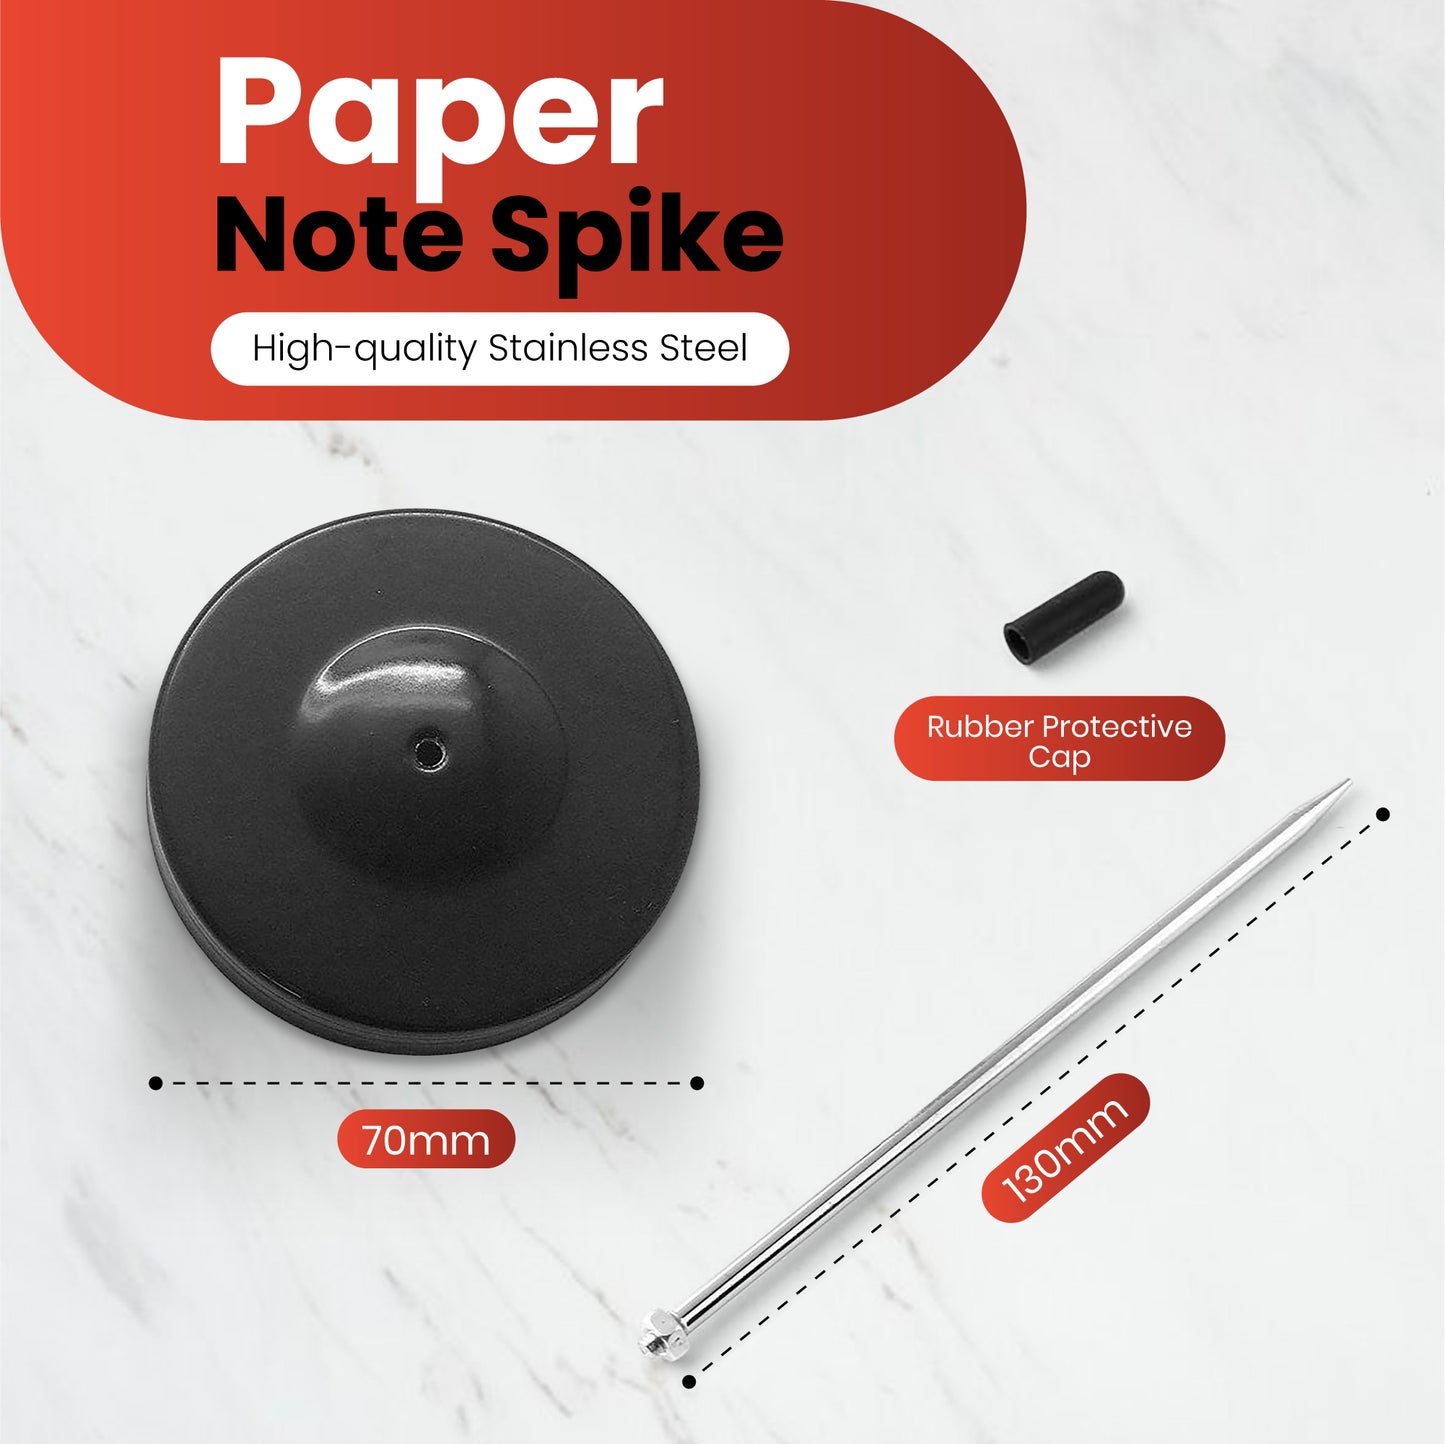 Pack of 3 Paper Spike Note Metal Holder Suitable for Restaurant Kitchen Order Rod Retail Office Hotel